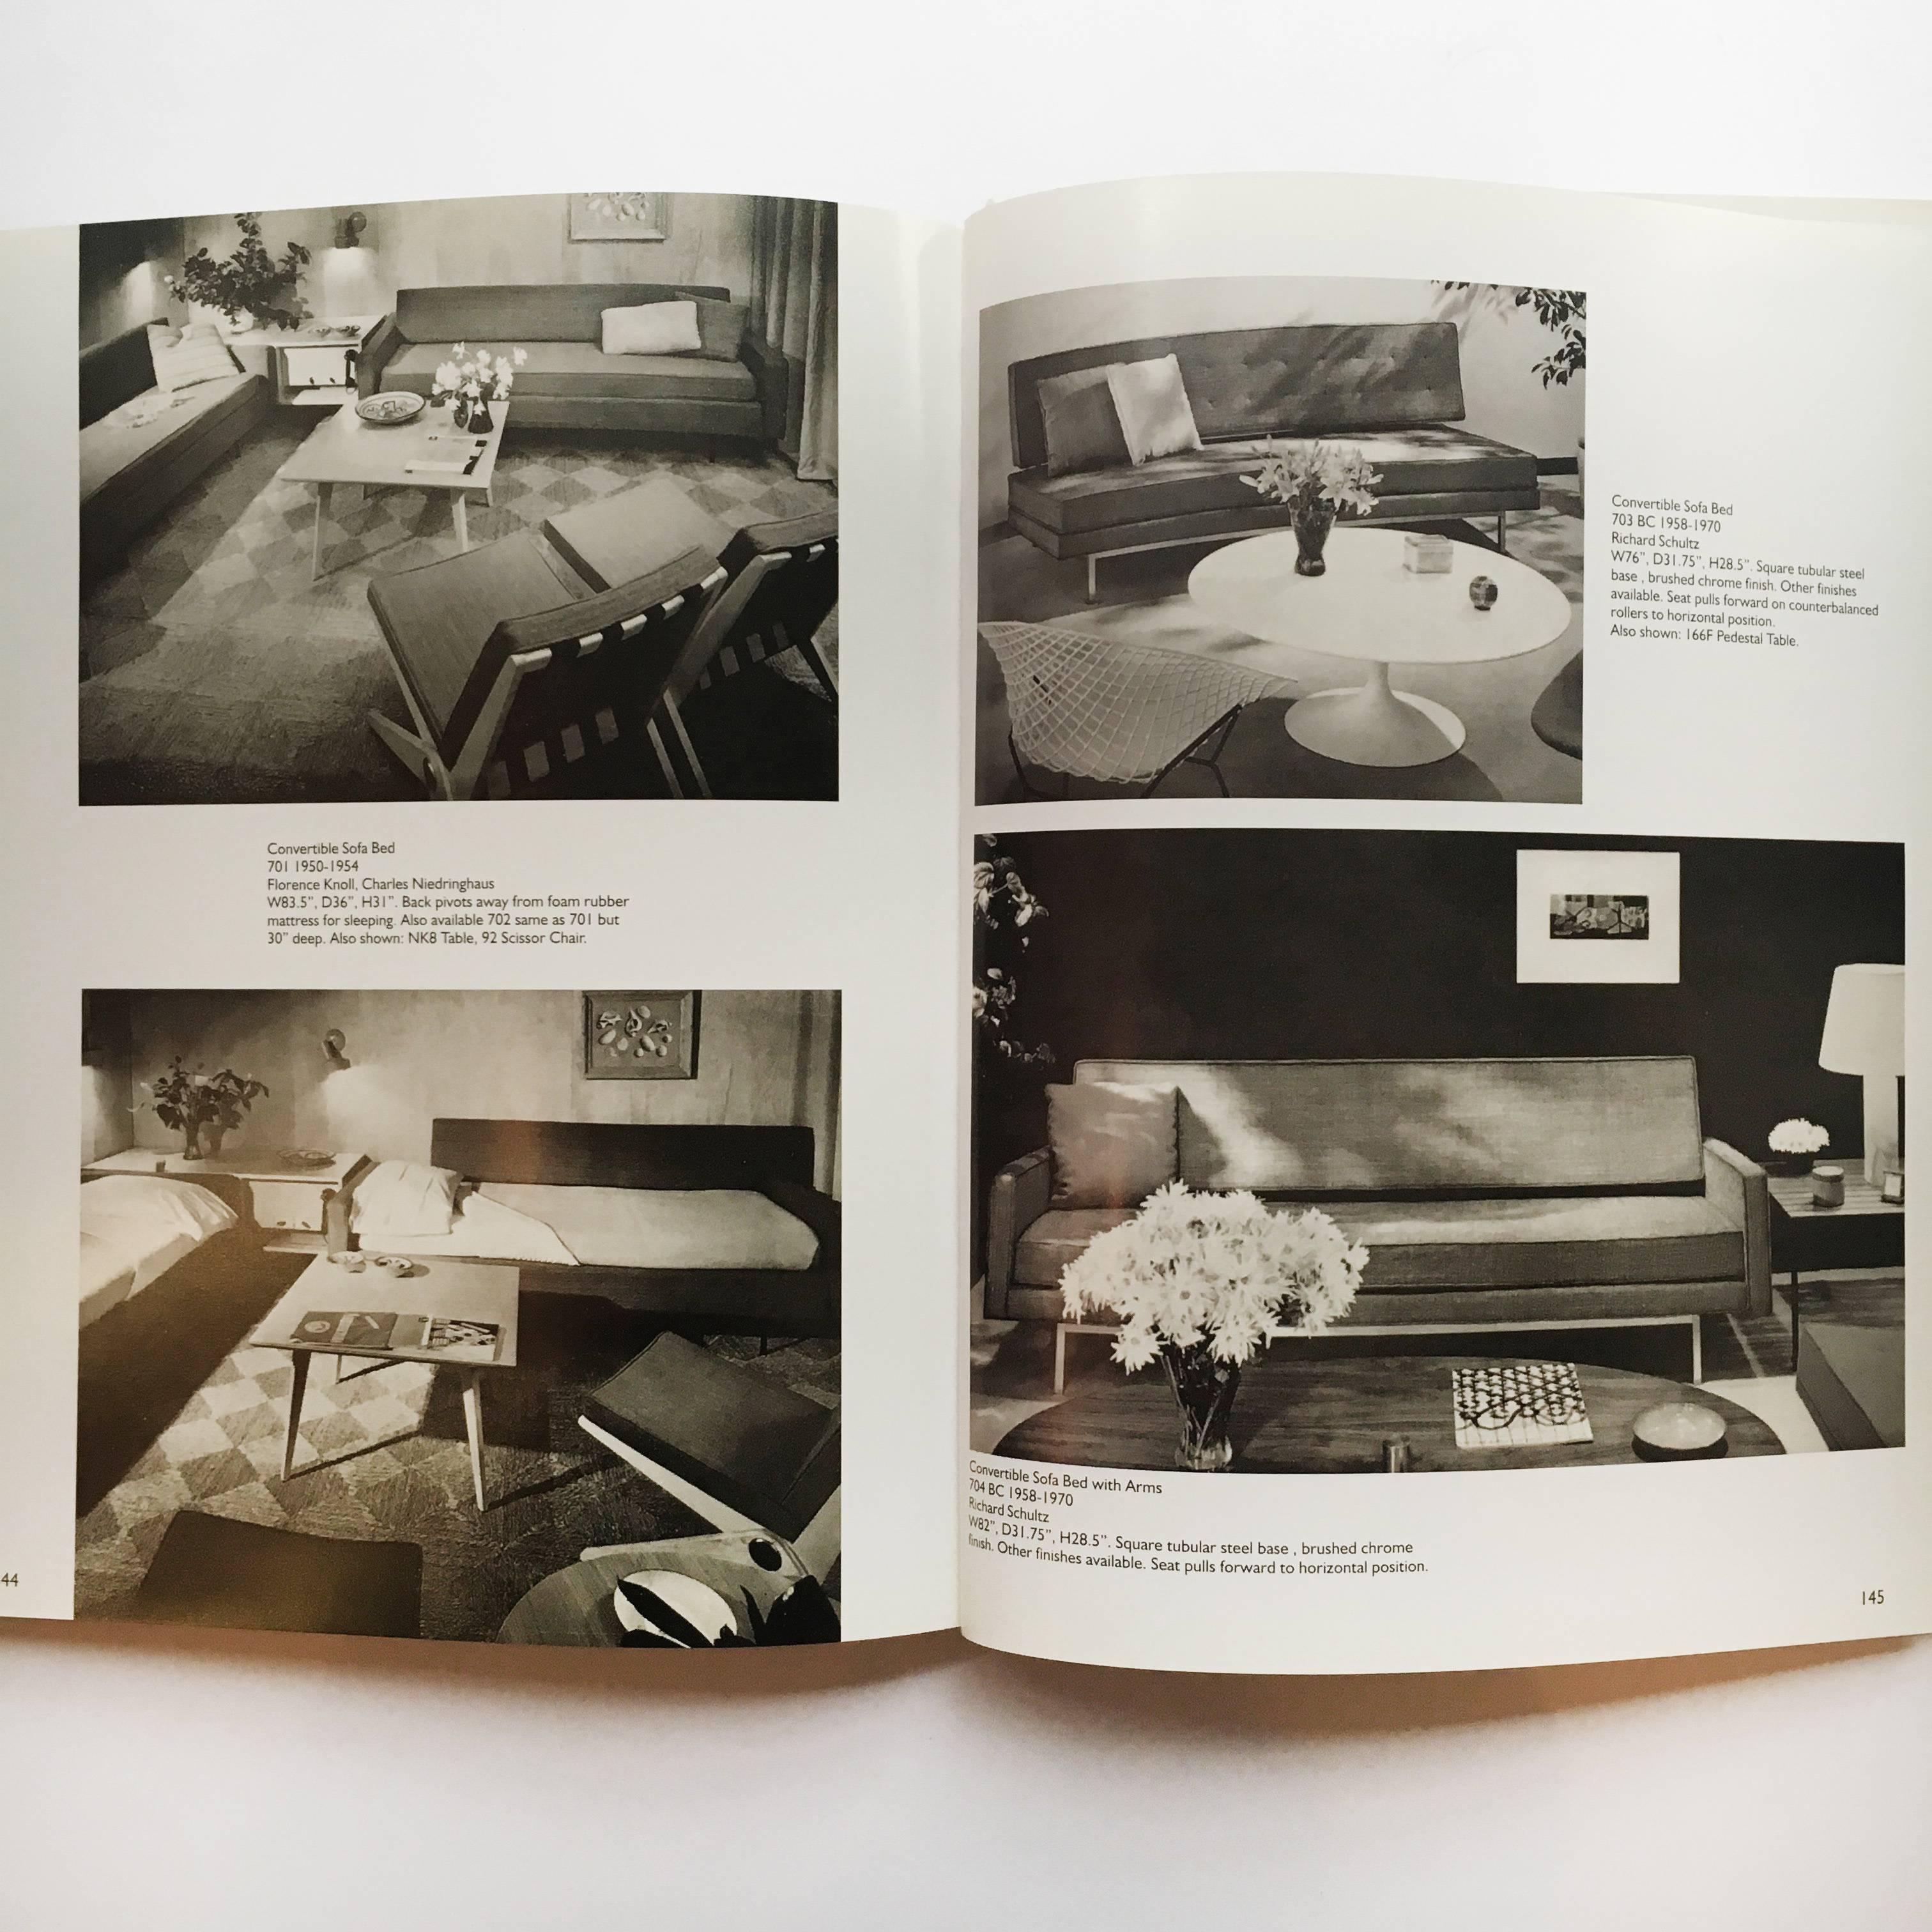 First edition, published by Schiffer Publishing, 1999

Starting out as a leather business in Stuttgart, 1865, the Knoll Empire grew as Walter Knoll expanded the furniture manufacturing, making pieces of such high quality that they were appointed